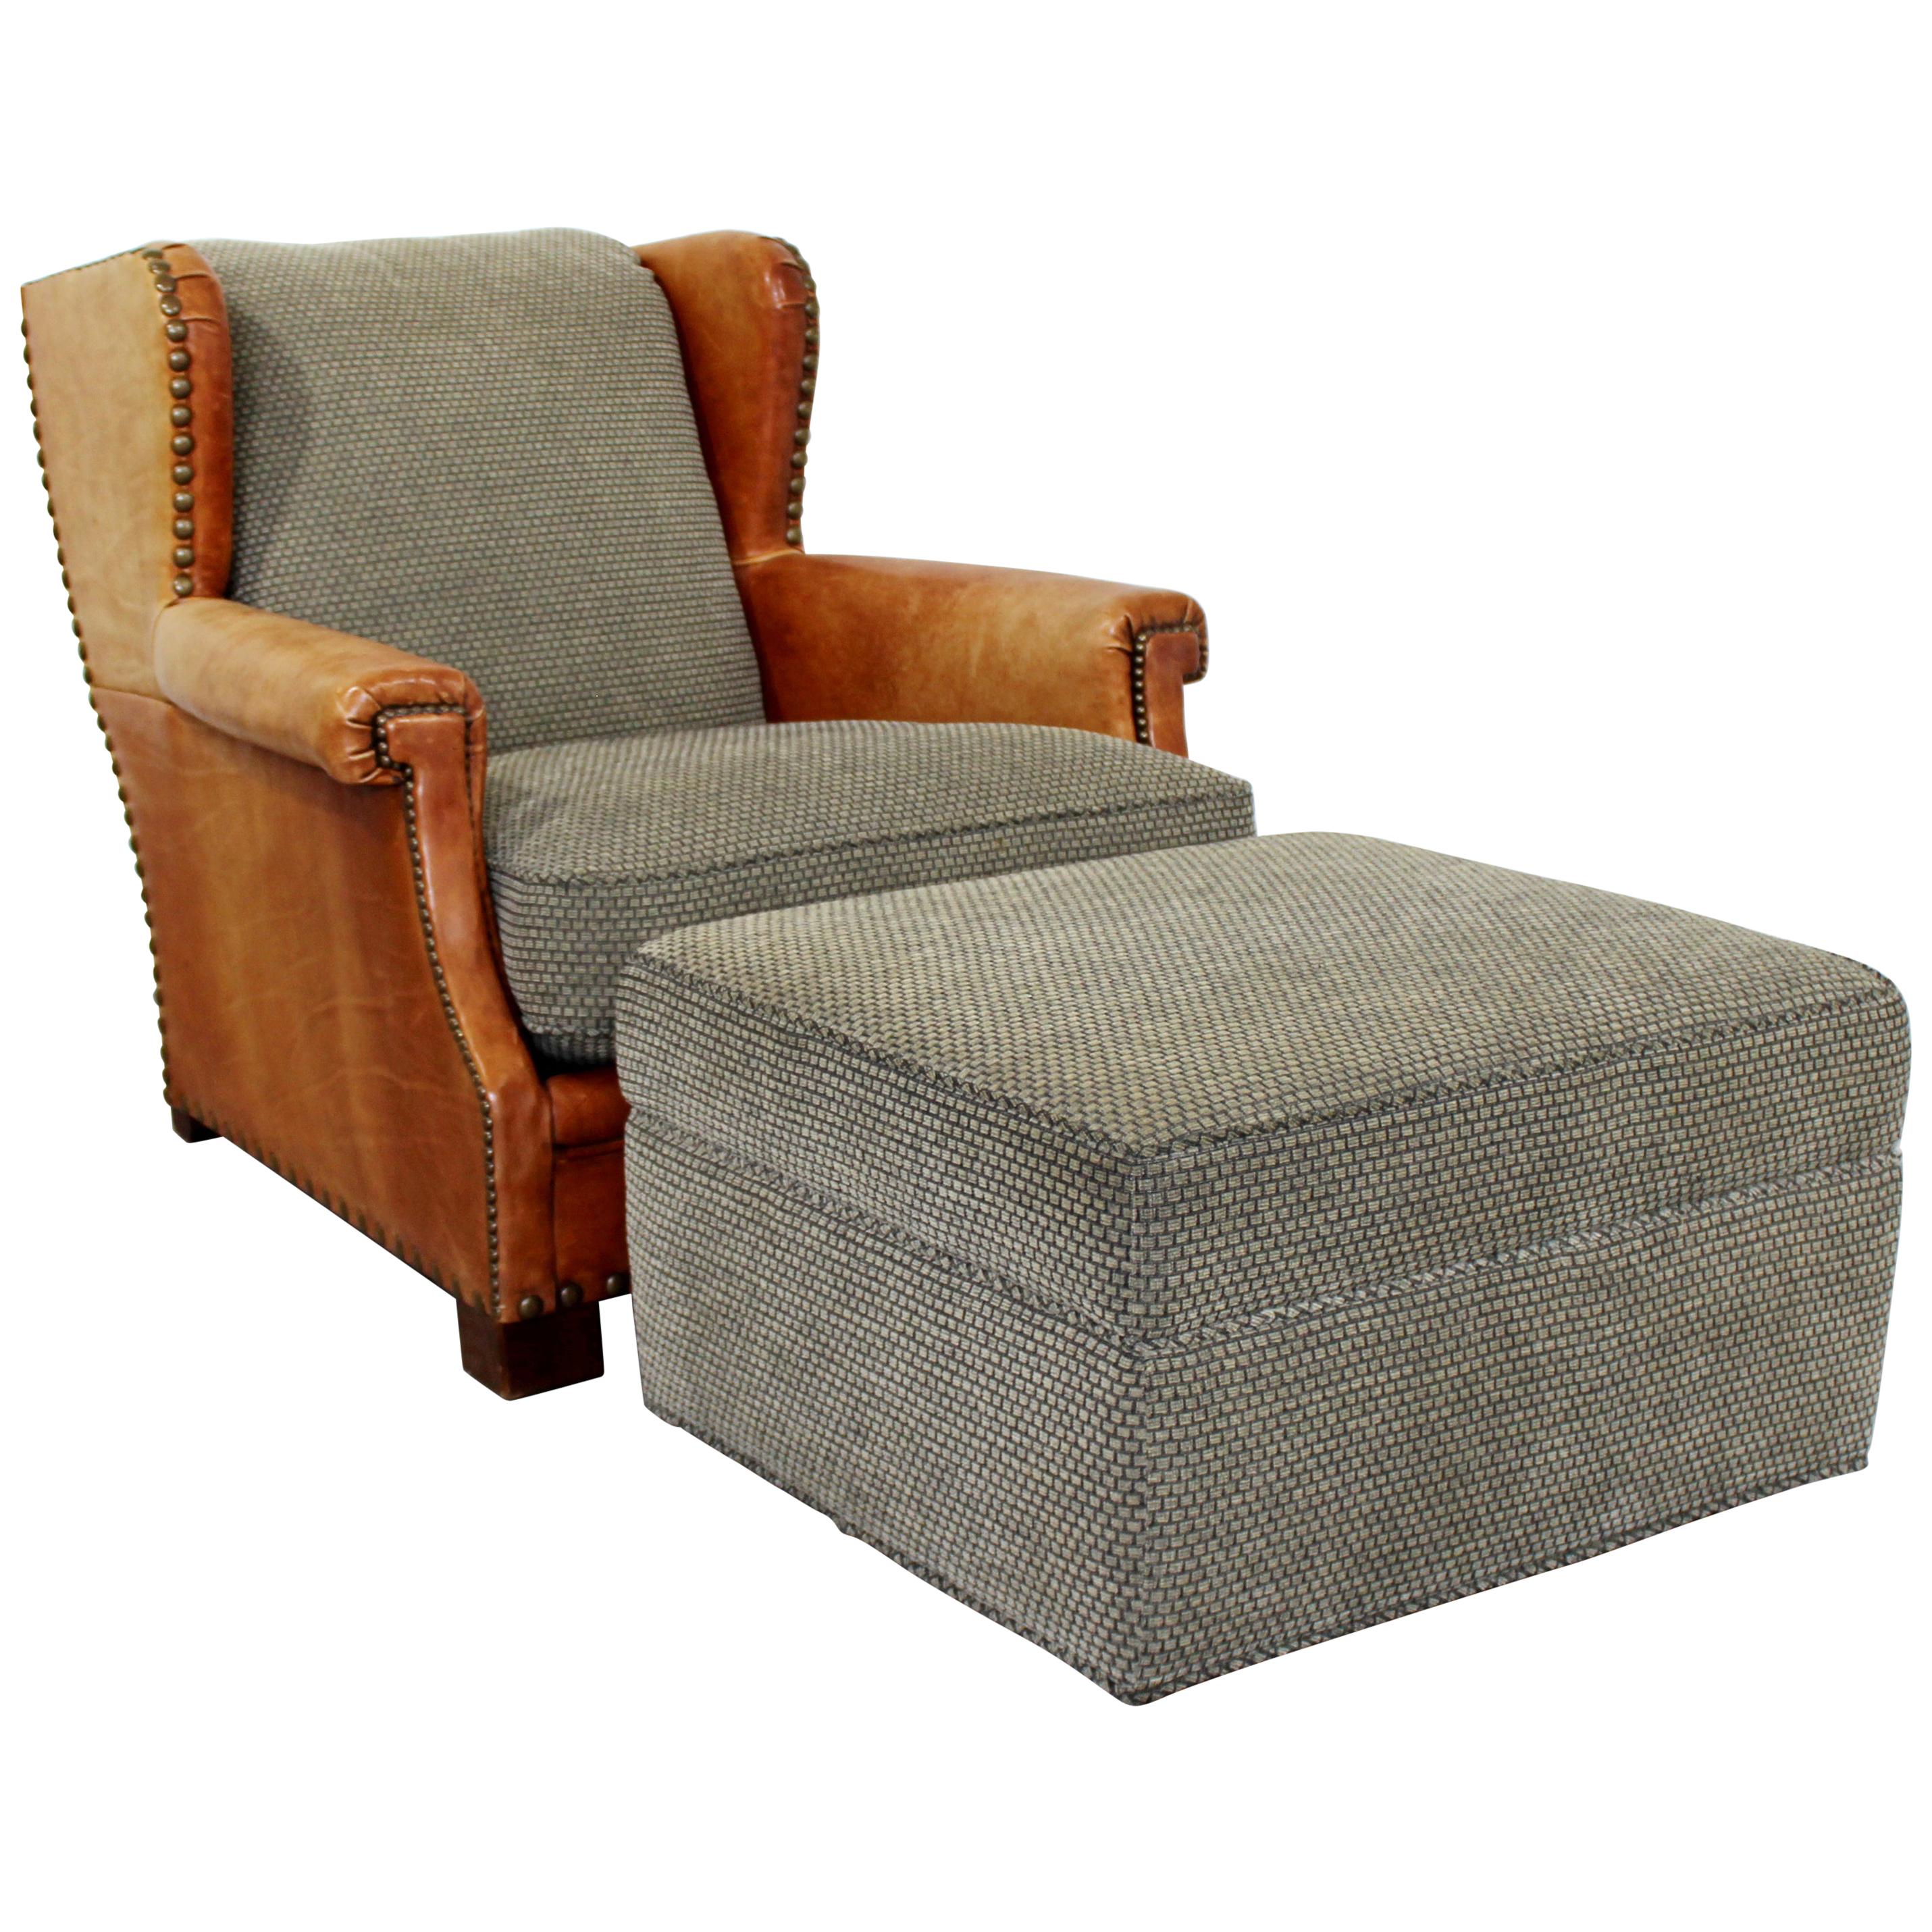 Contemporary Modern Ralph Lauren Studded Leather and Fabric Club Chair & Ottoman